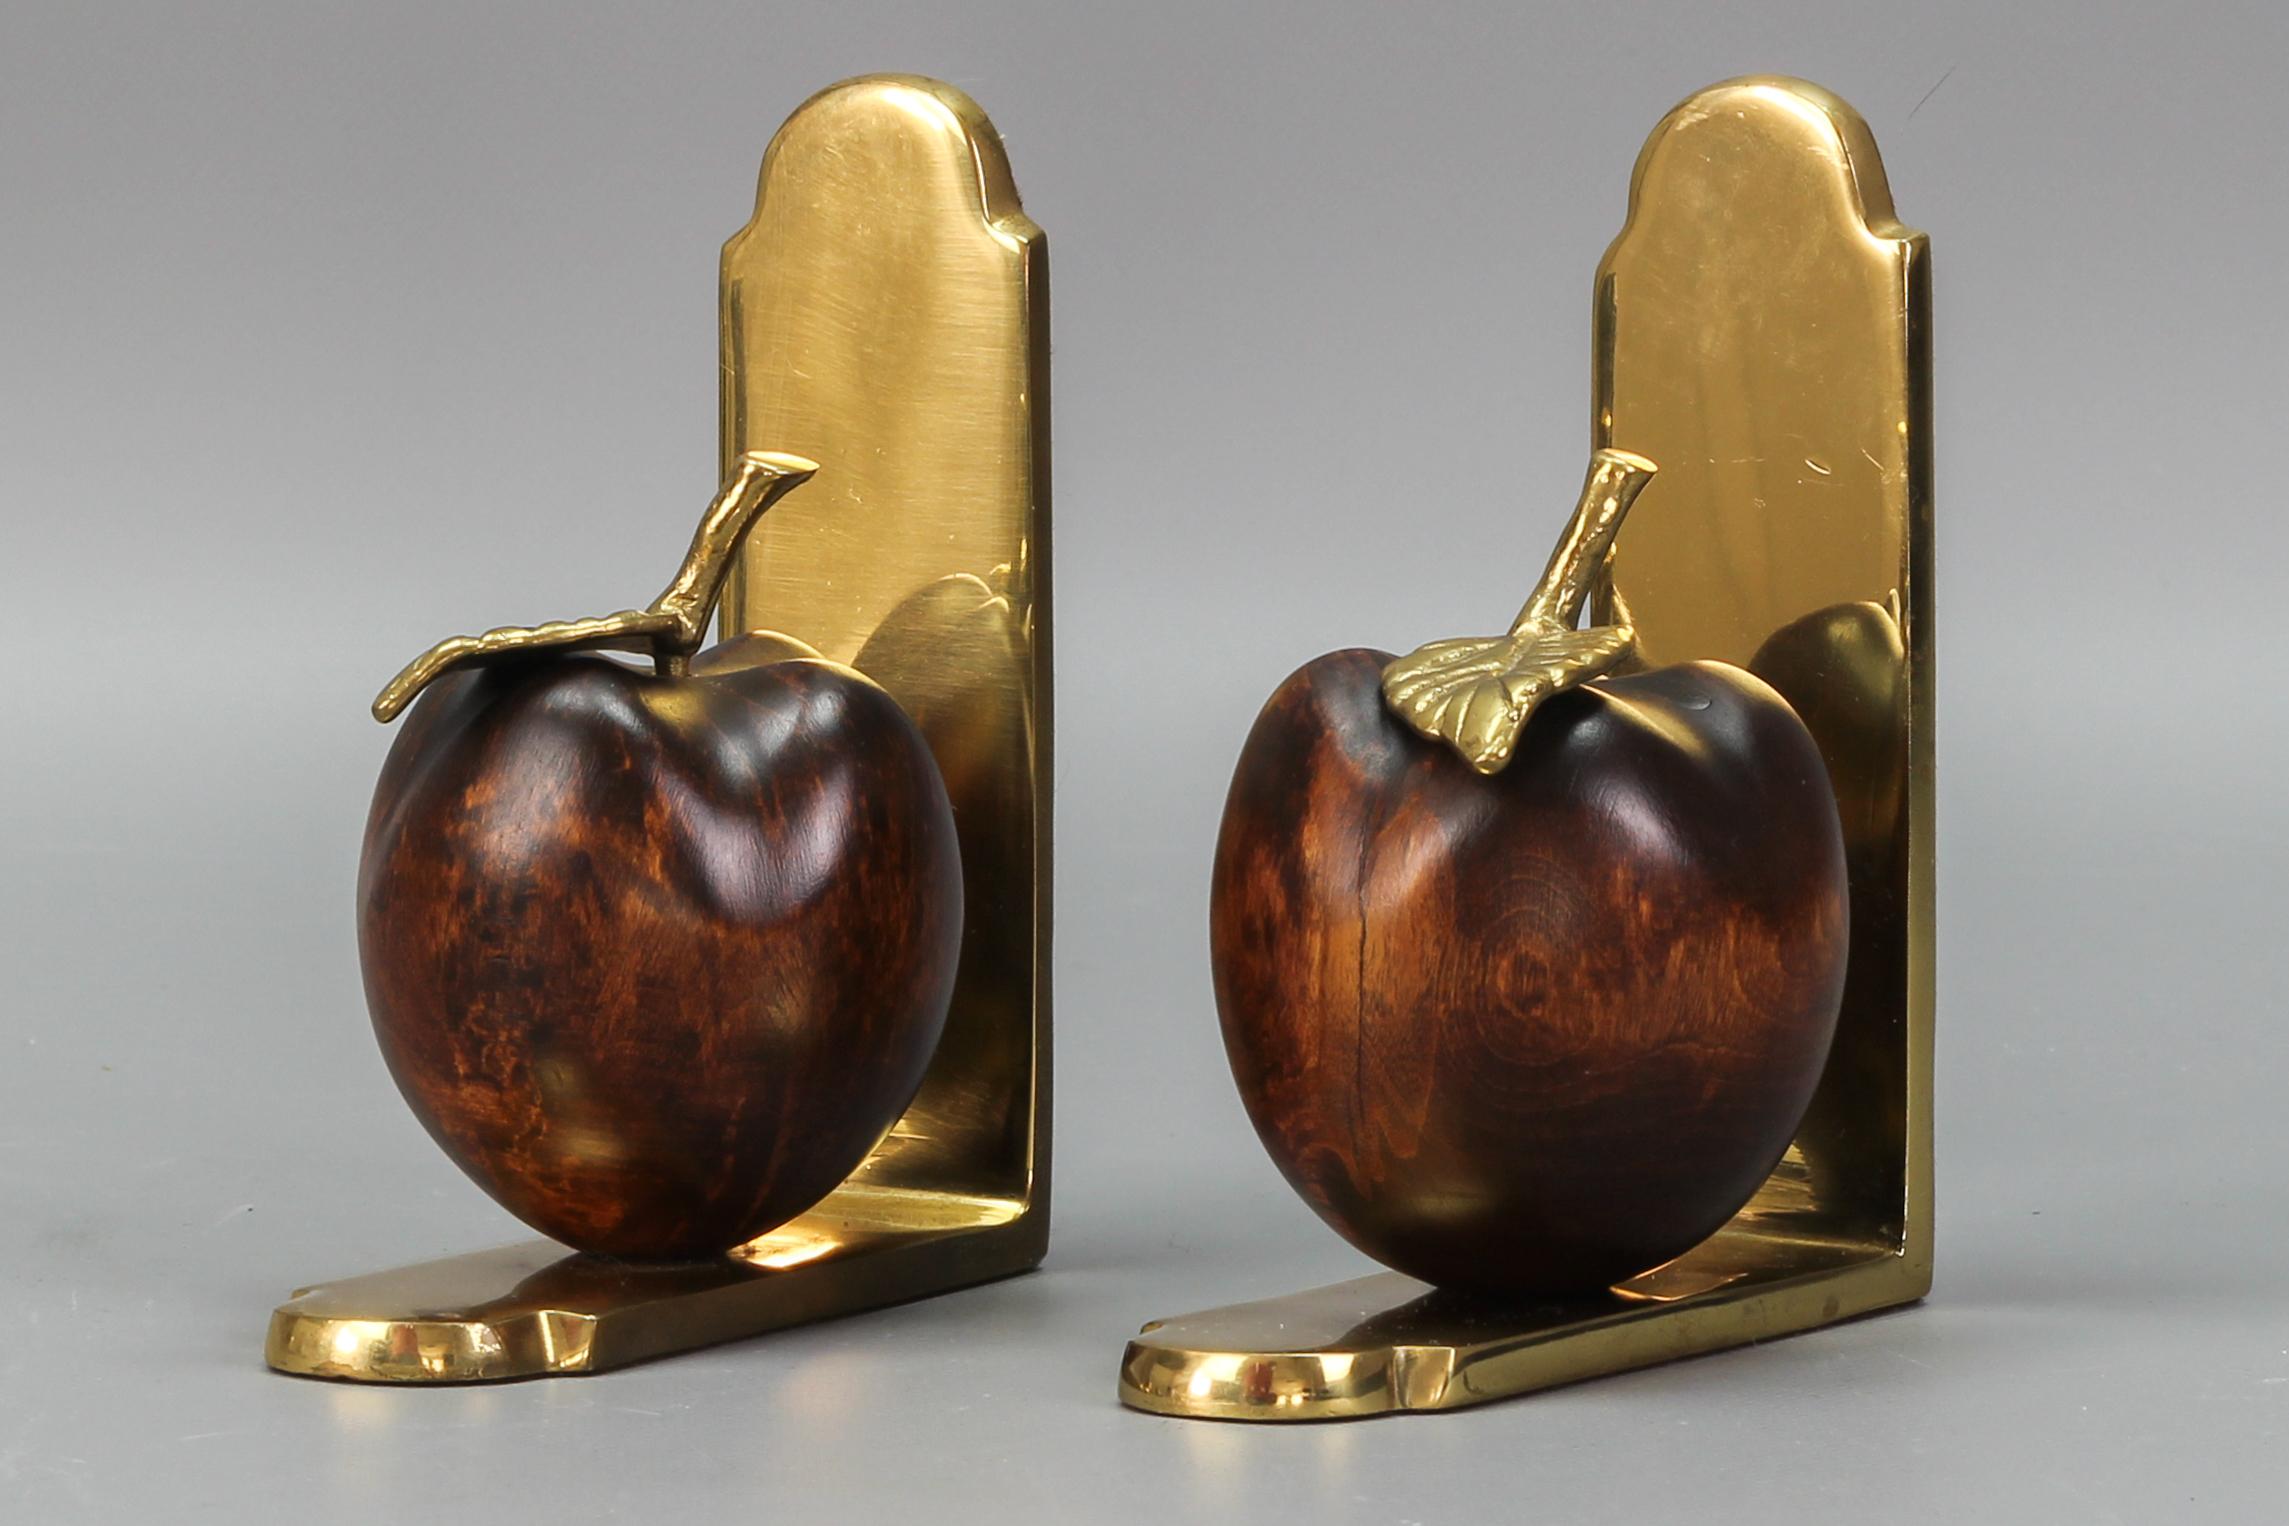 Mid-Century Modern Vintage Brass and Wooden Apples Bookends For Sale